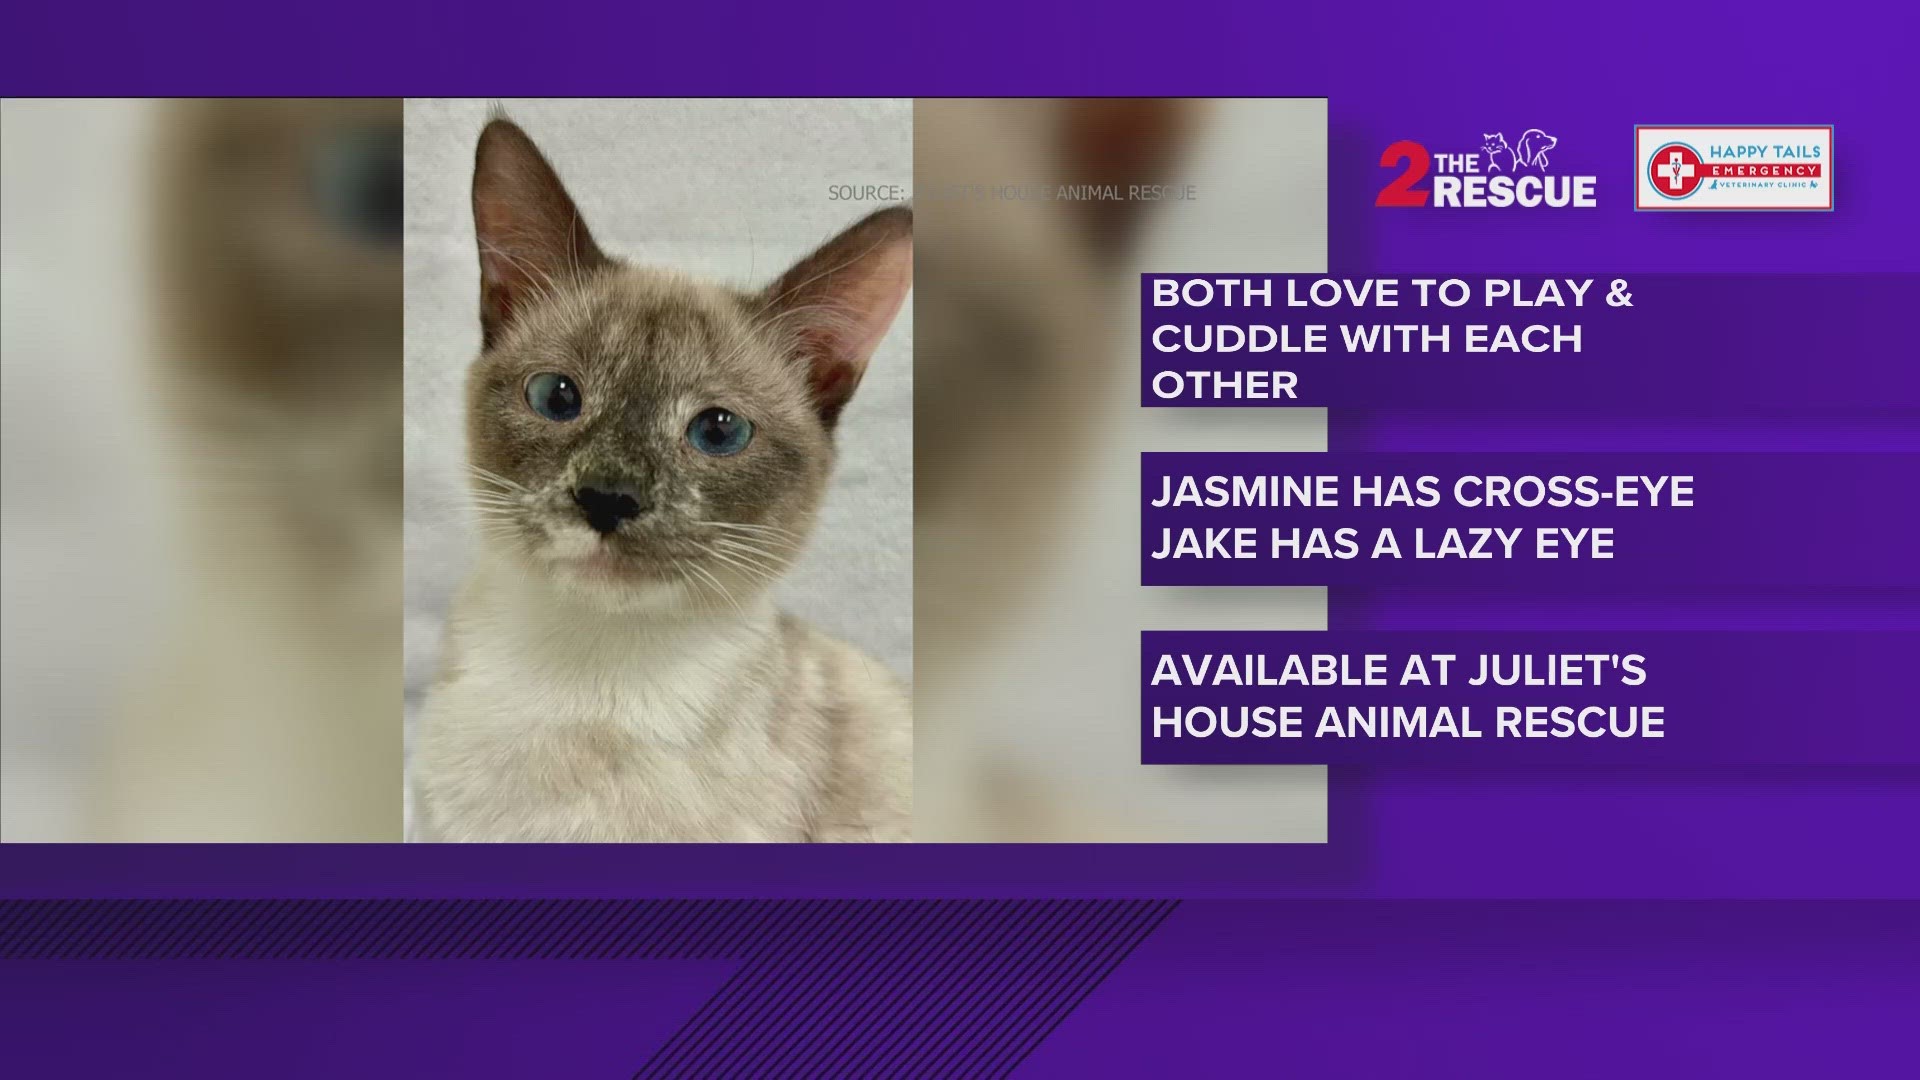 Let's get Jasmine and Jake adopted! They are available at Juliet's House Animal Rescue.